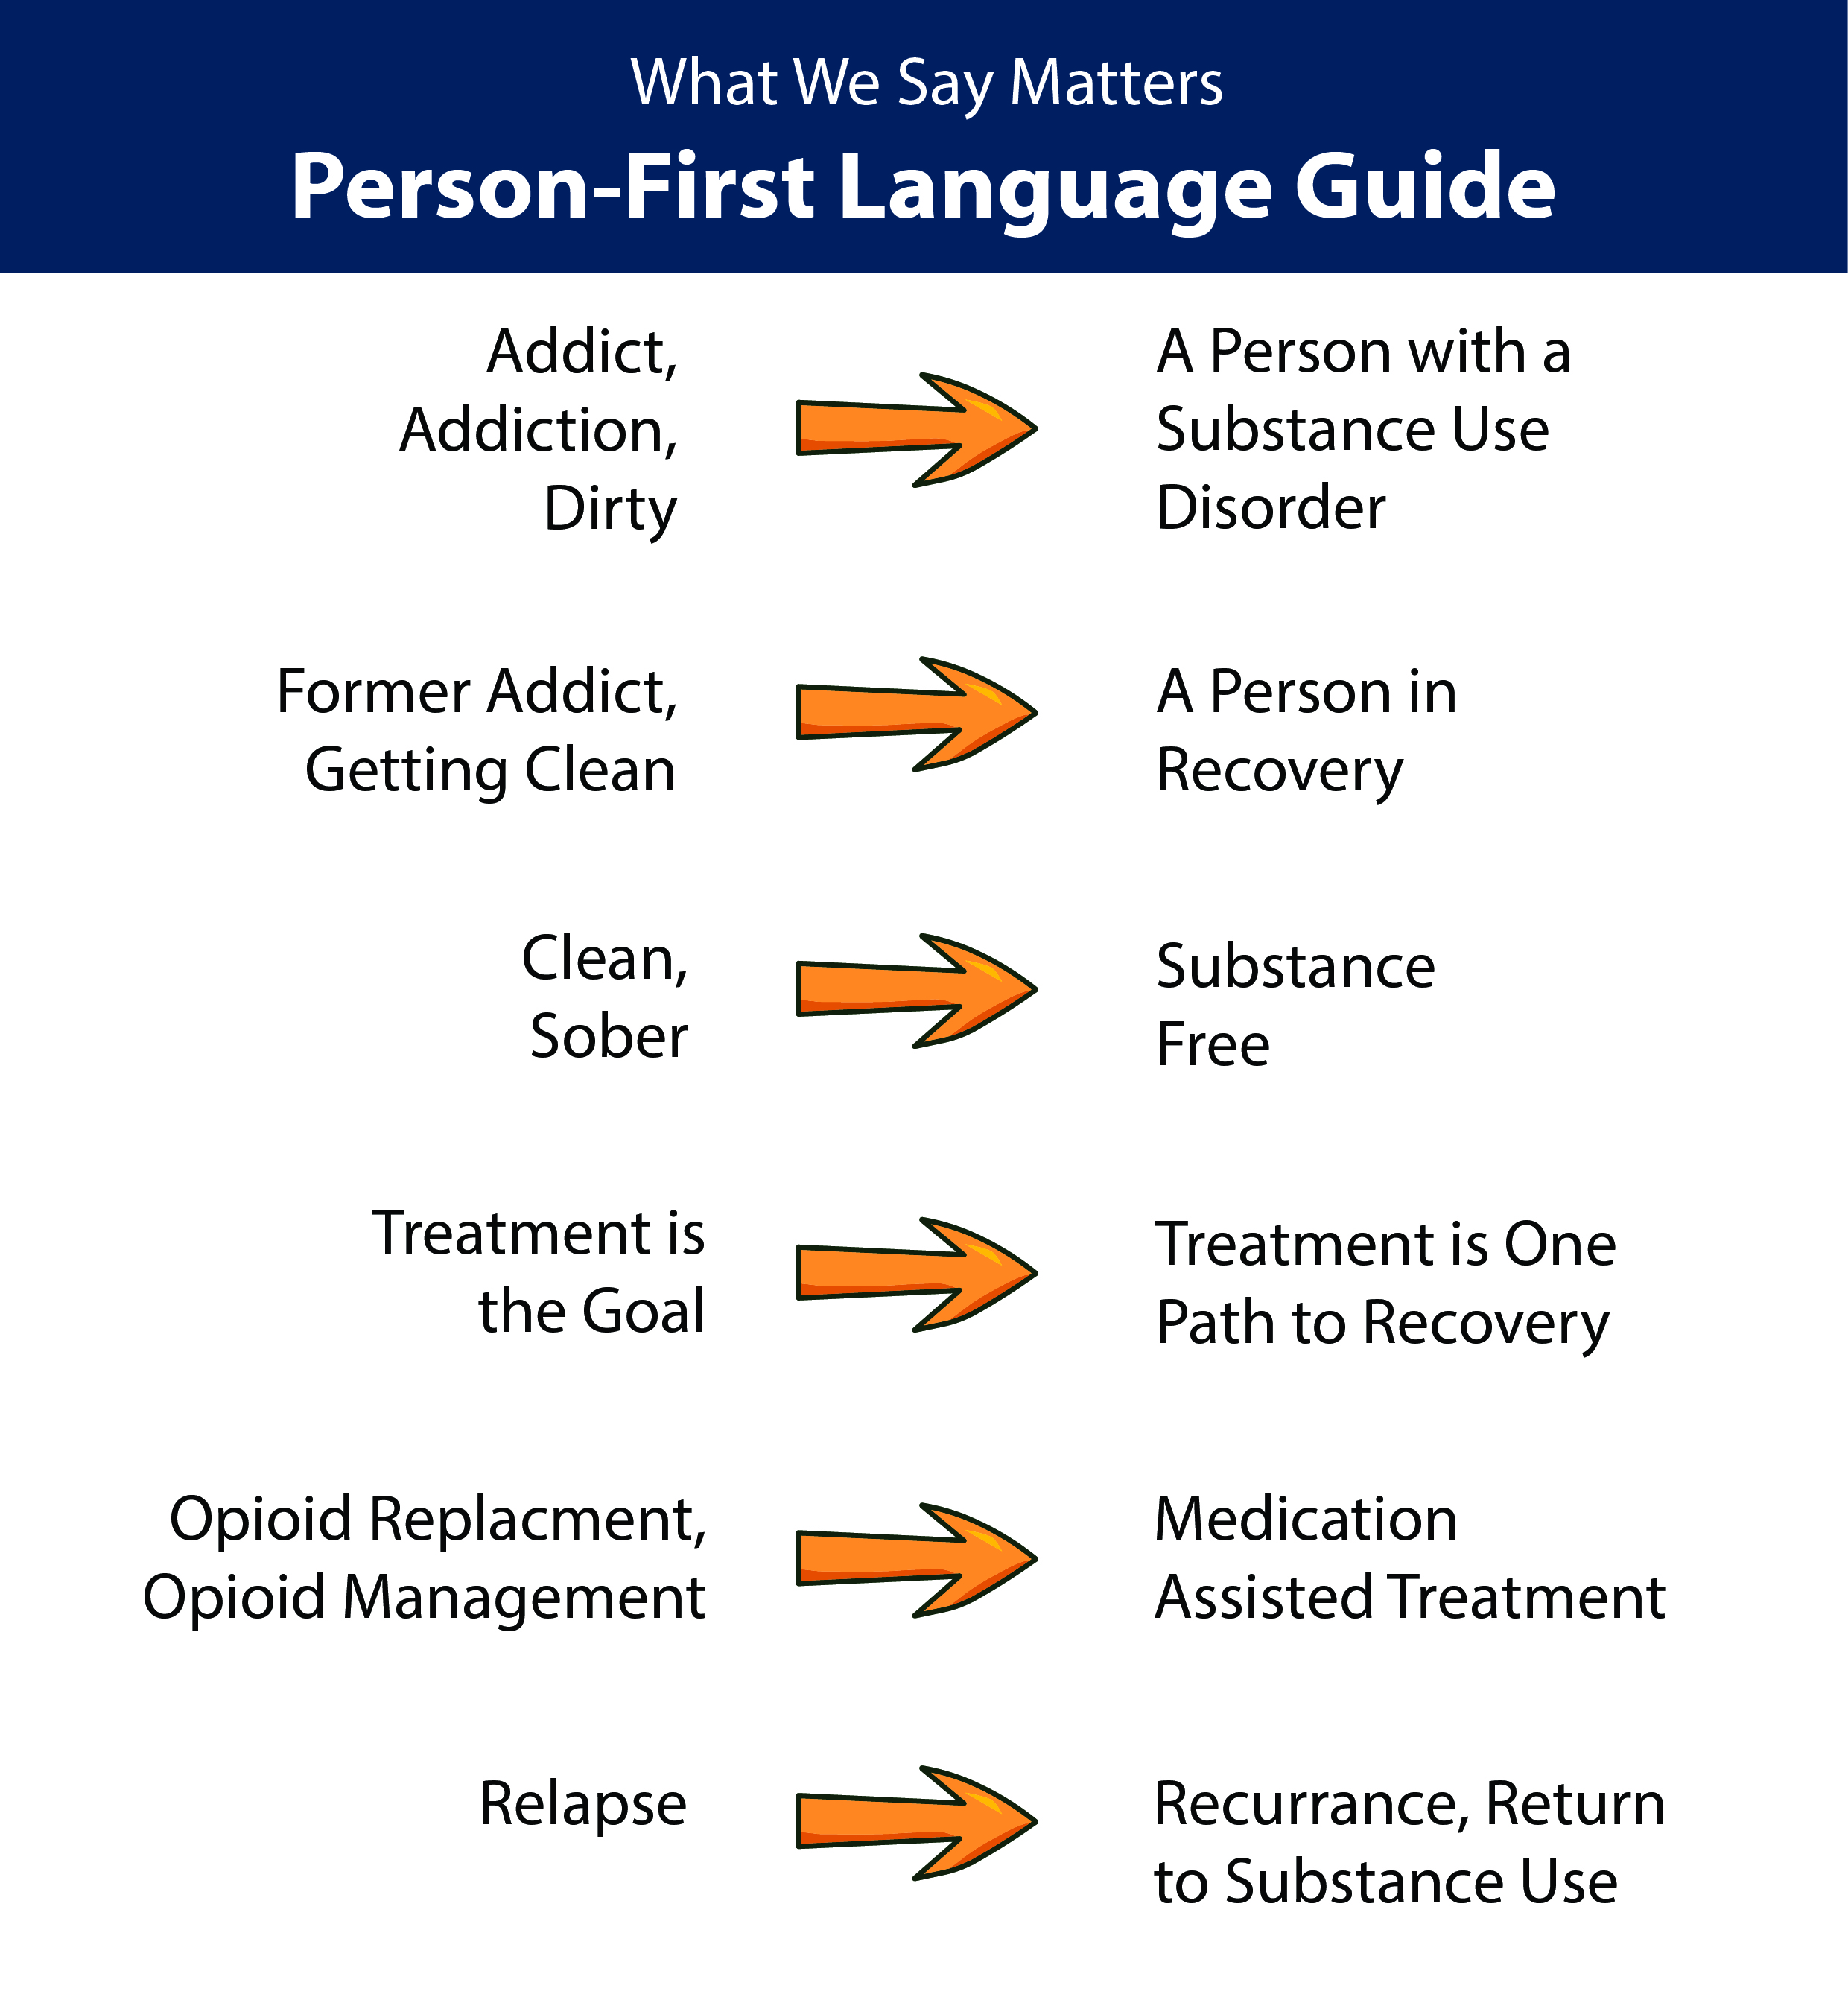 Person-First Language Guide